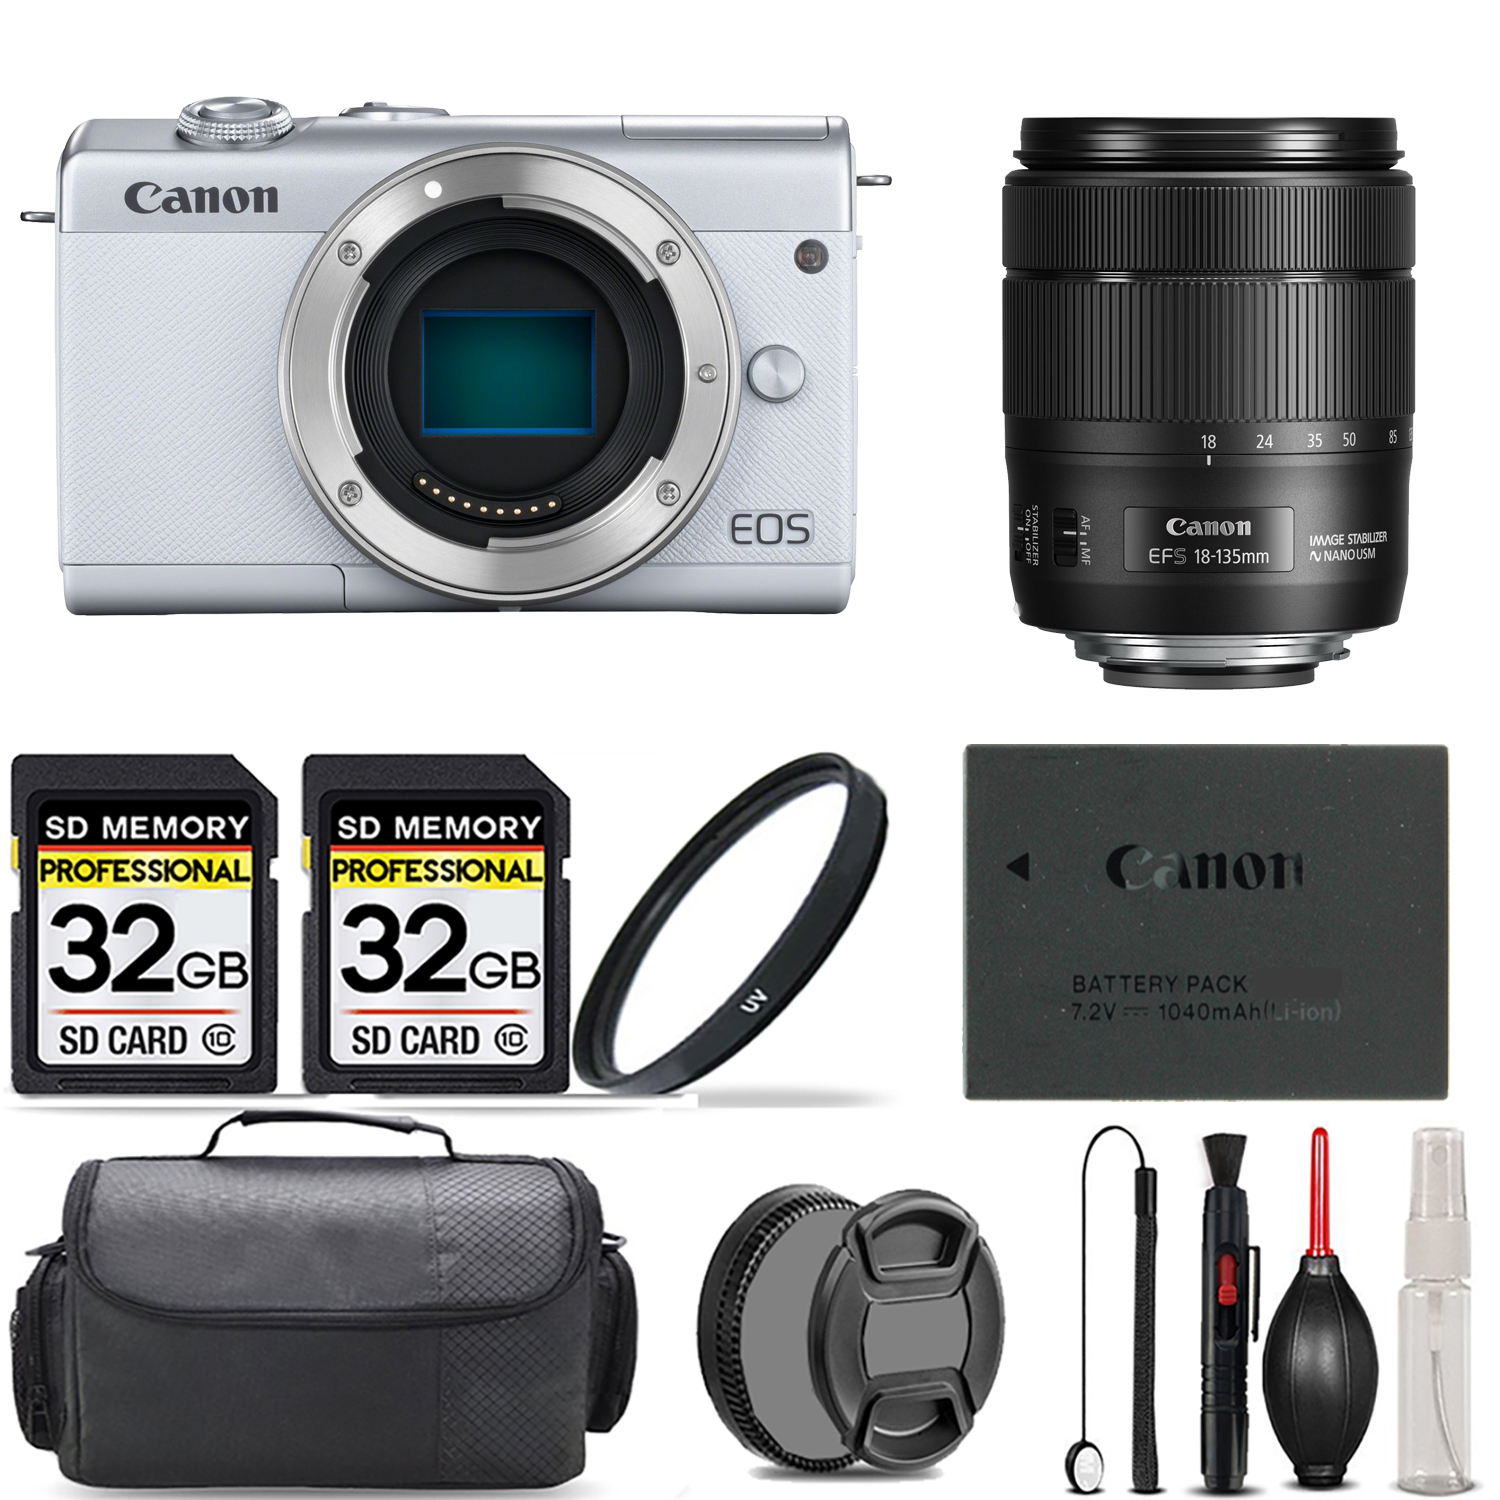 EOS M200  Camera (White) + 15-45mm IS STM Lens (Graphite) + UV Filter + 64GB *FREE SHIPPING*